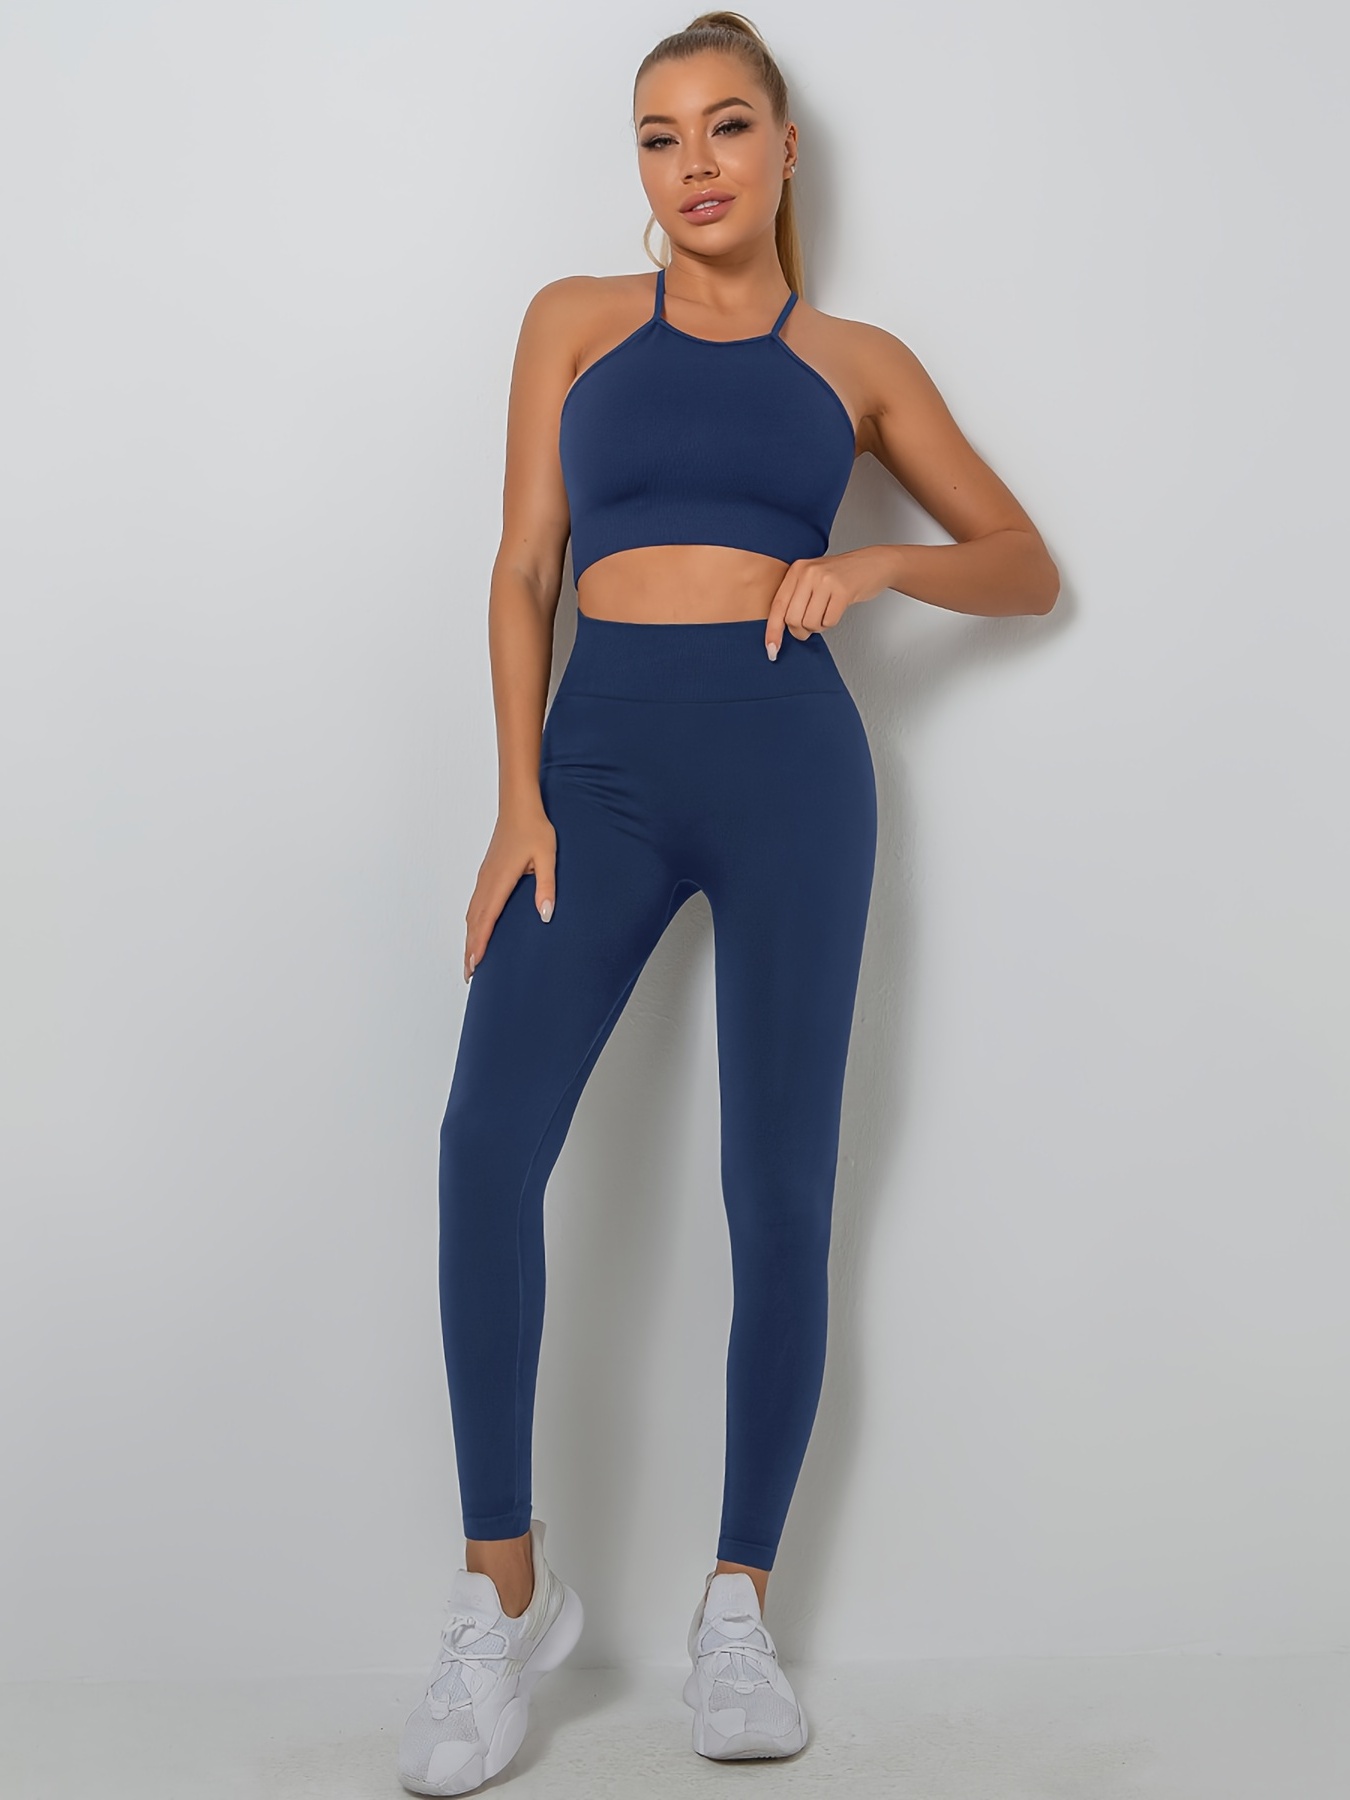 ZZAL women's sports suit Women's Yoga Sports Suit High Waist Sexy Wear  Tight Leggings Running Bra Casual Activewear Clothes(Size:M,Color:Blue) :  : Fashion